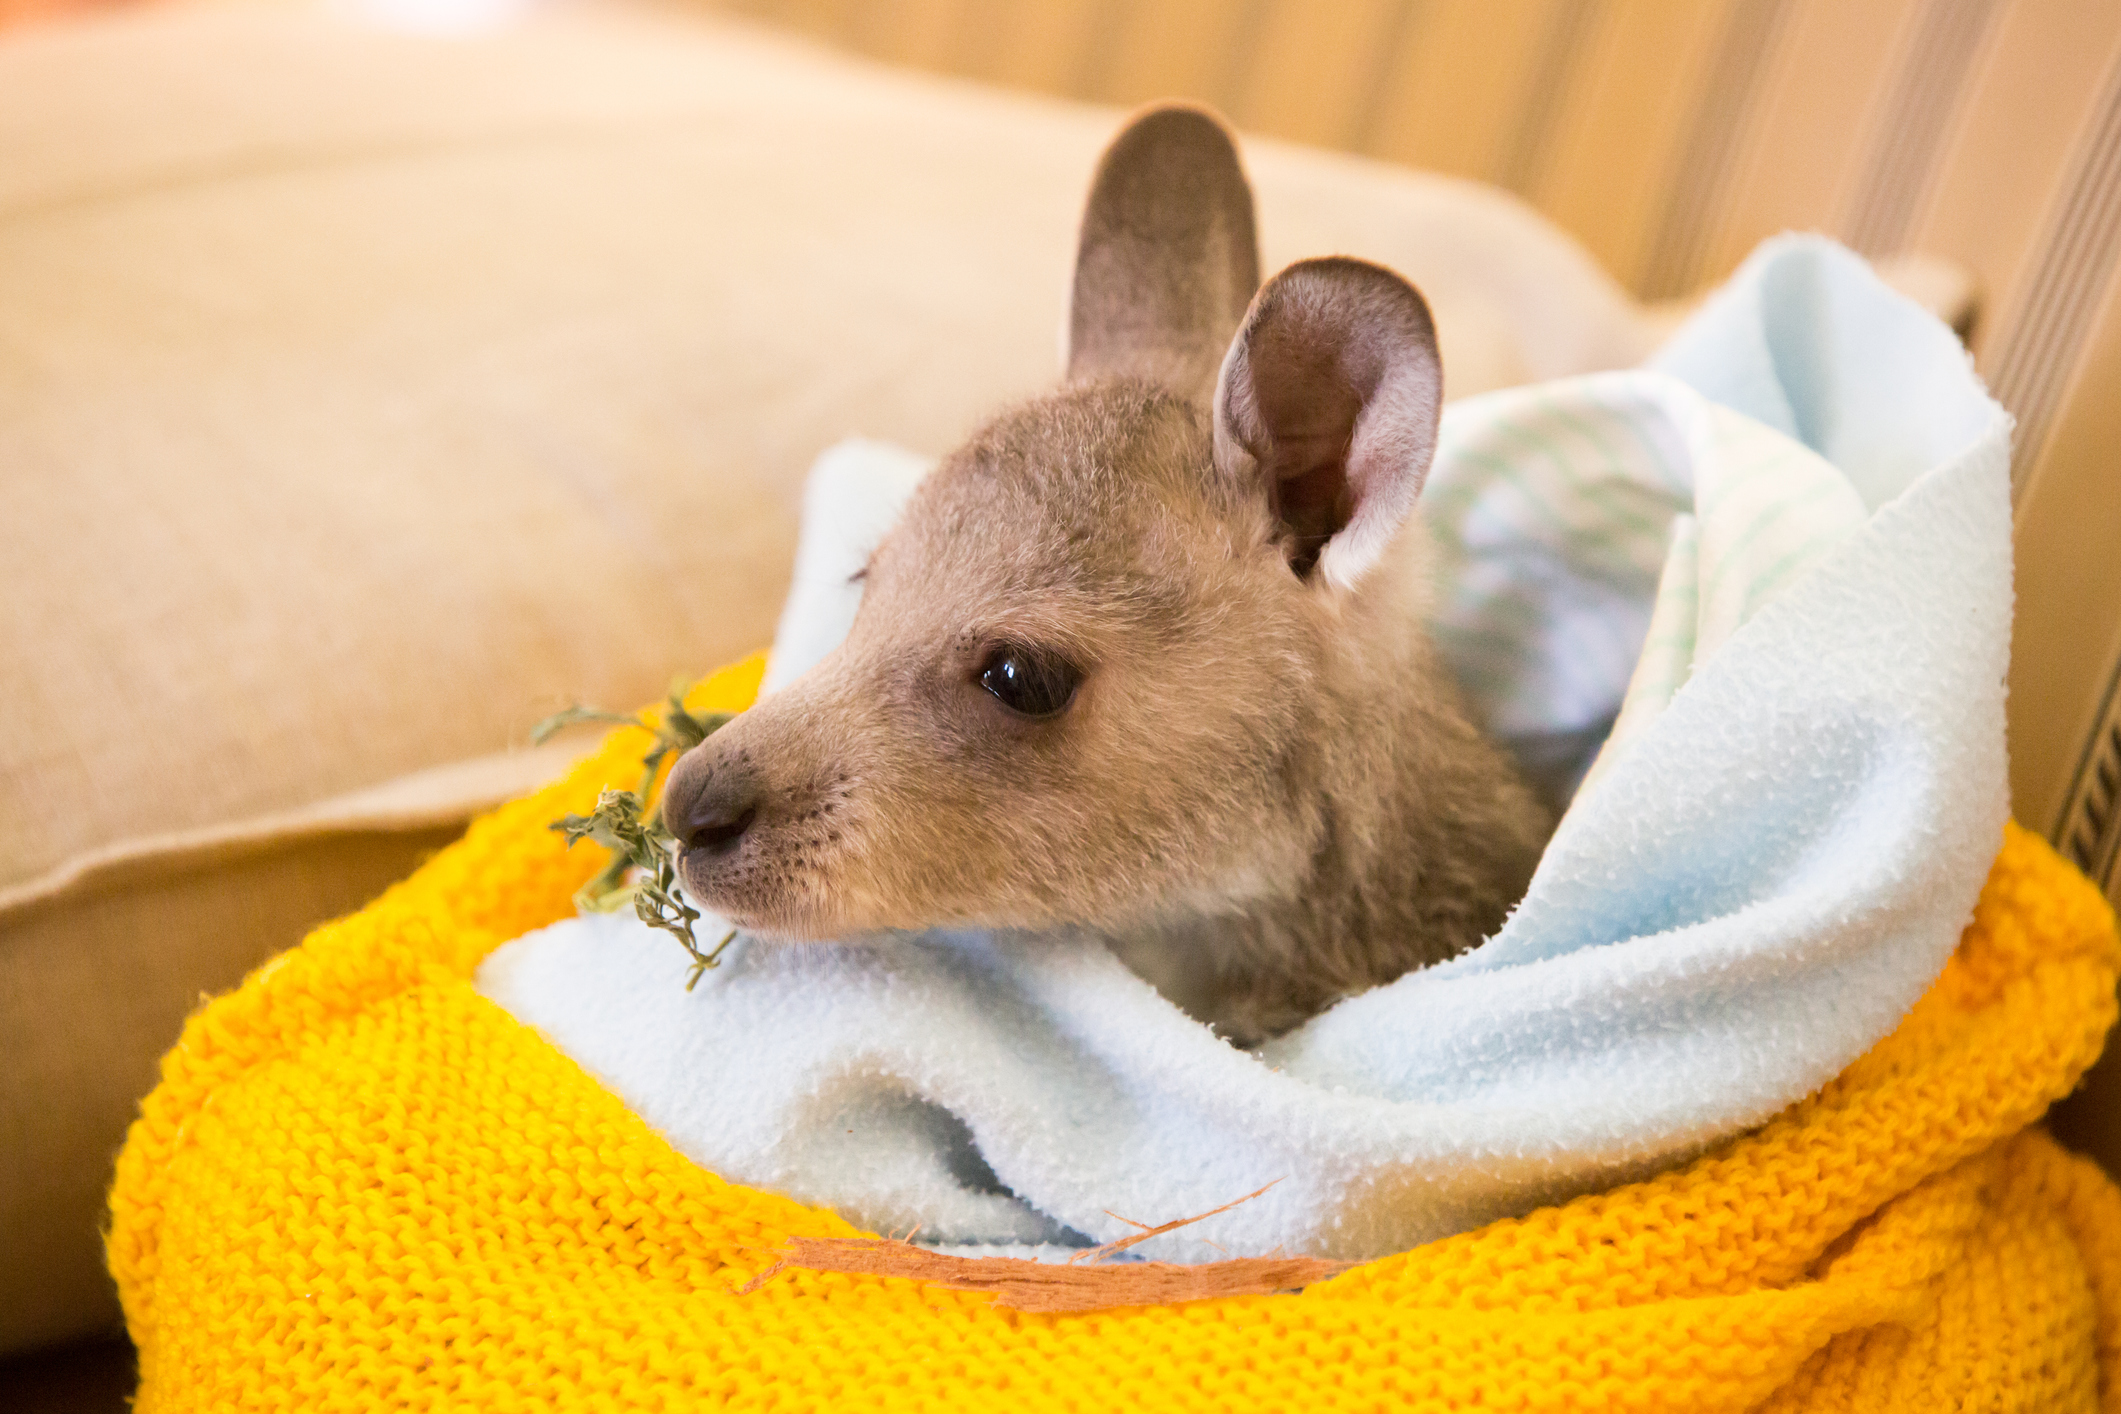 How To Sew Pouches For Injured Australian Wildlife